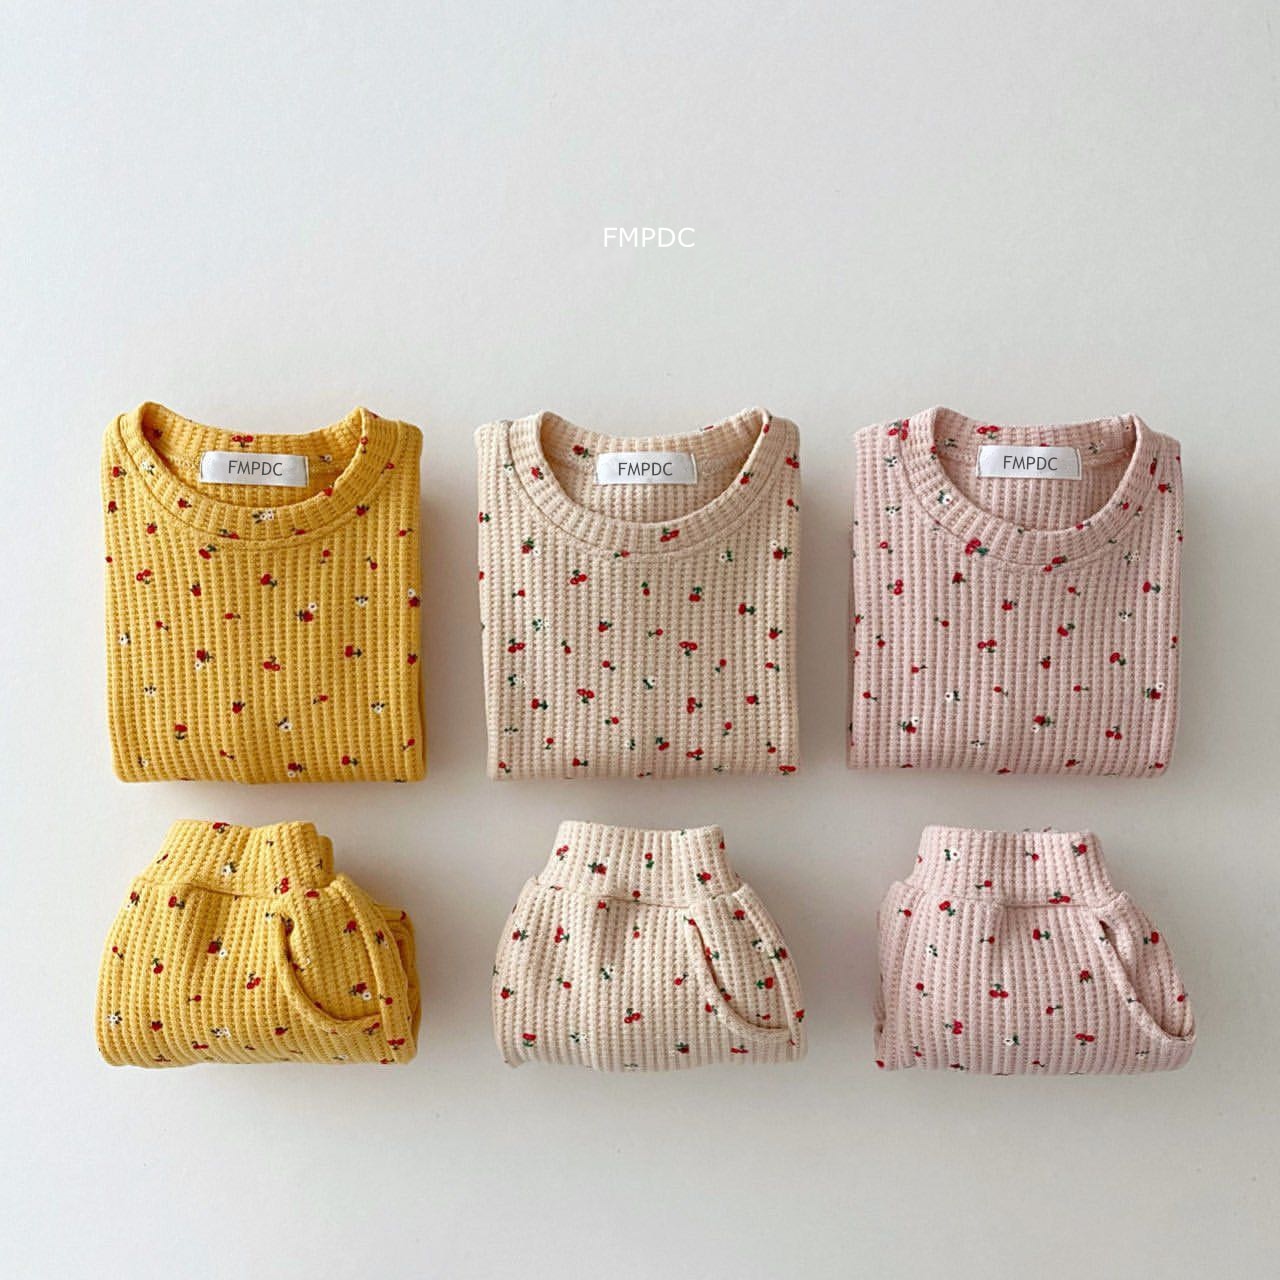 2022 New Toddler Kids Waffle Cotton Clothes Set Many Fruits Print Sweatshirt + Casual Pants 2pcs Boys Suit Baby Girl Outfits